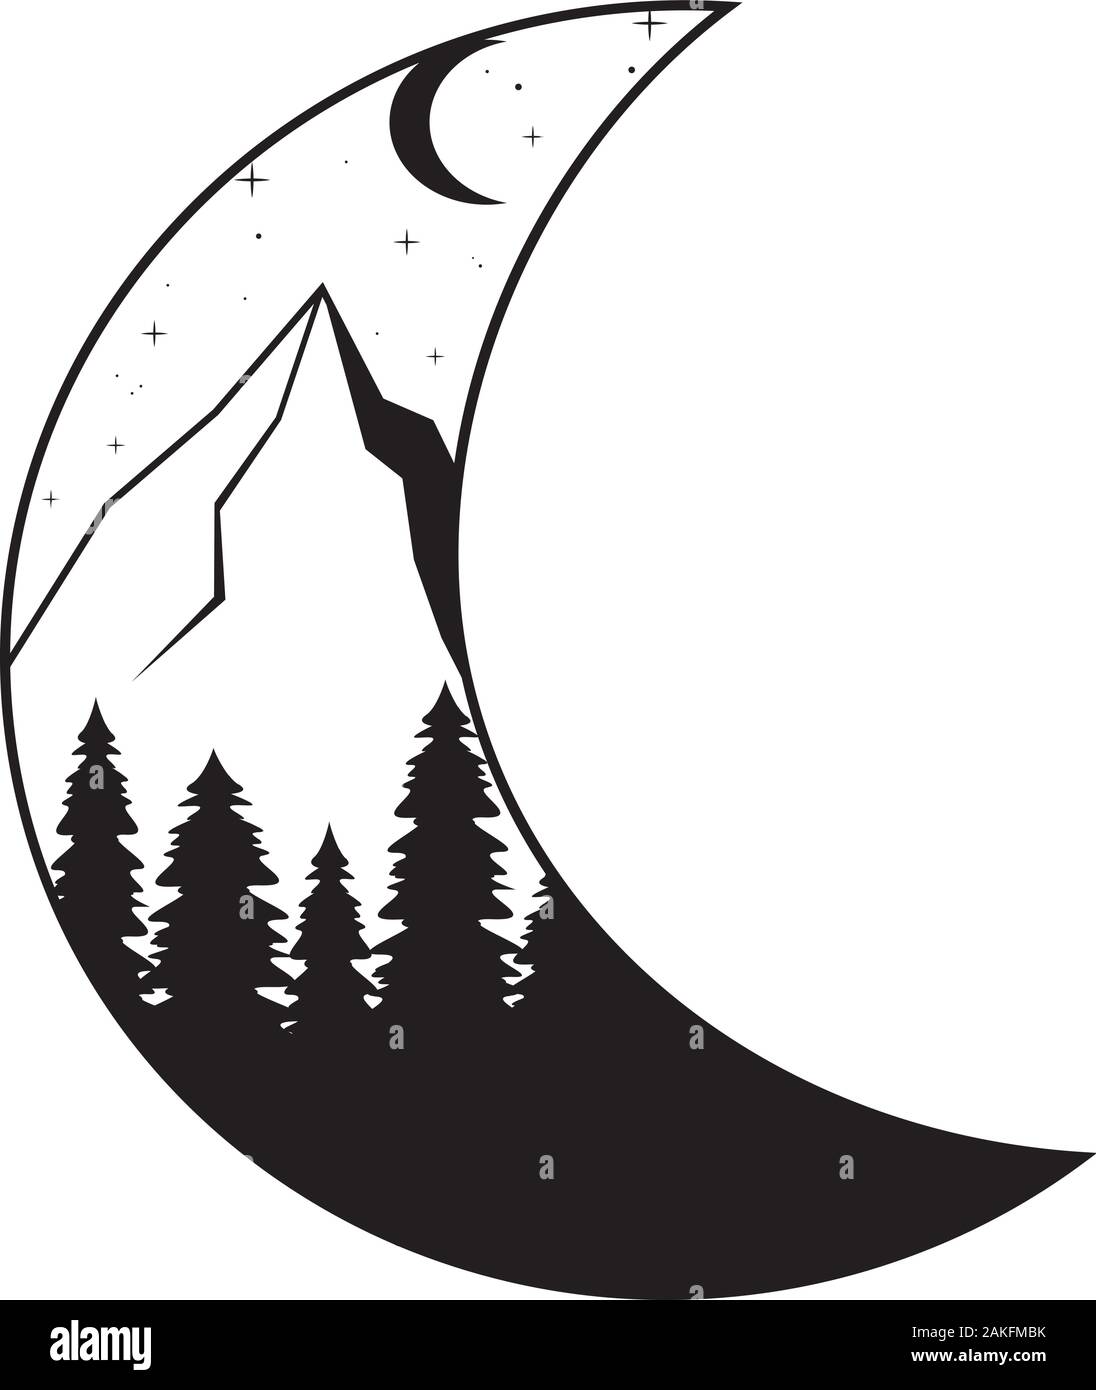 Moon and mountains, forest. Night landscape silhouette Stock Vector